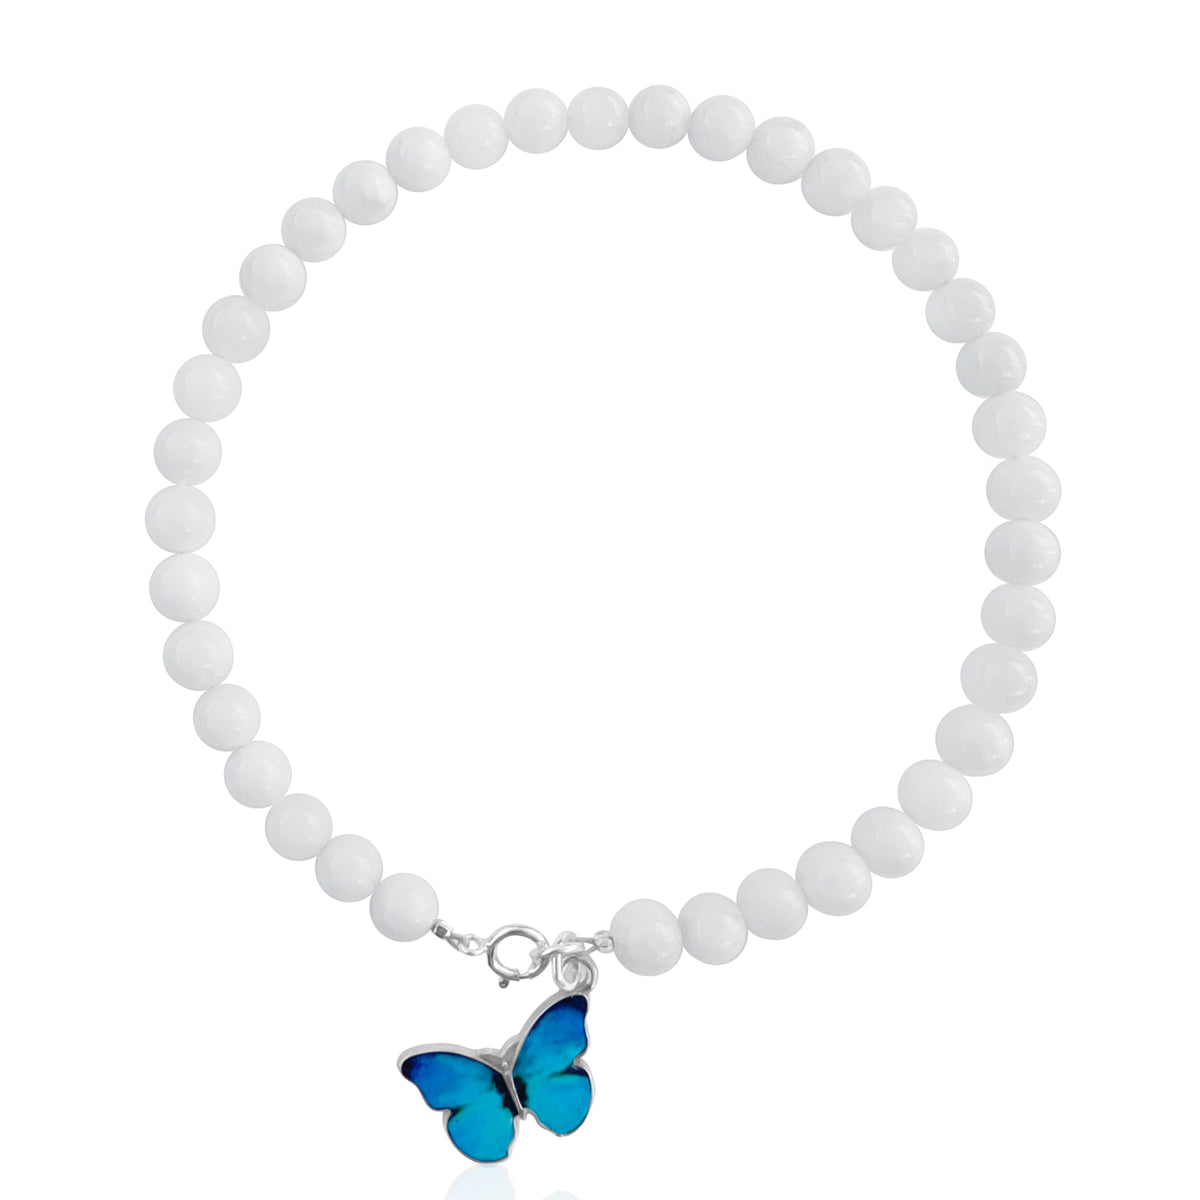 Let the "Joyful Butterfly Dance Anklet" be your mindful companions, encouraging you to dance through life with the carefree spirit of a butterfly.